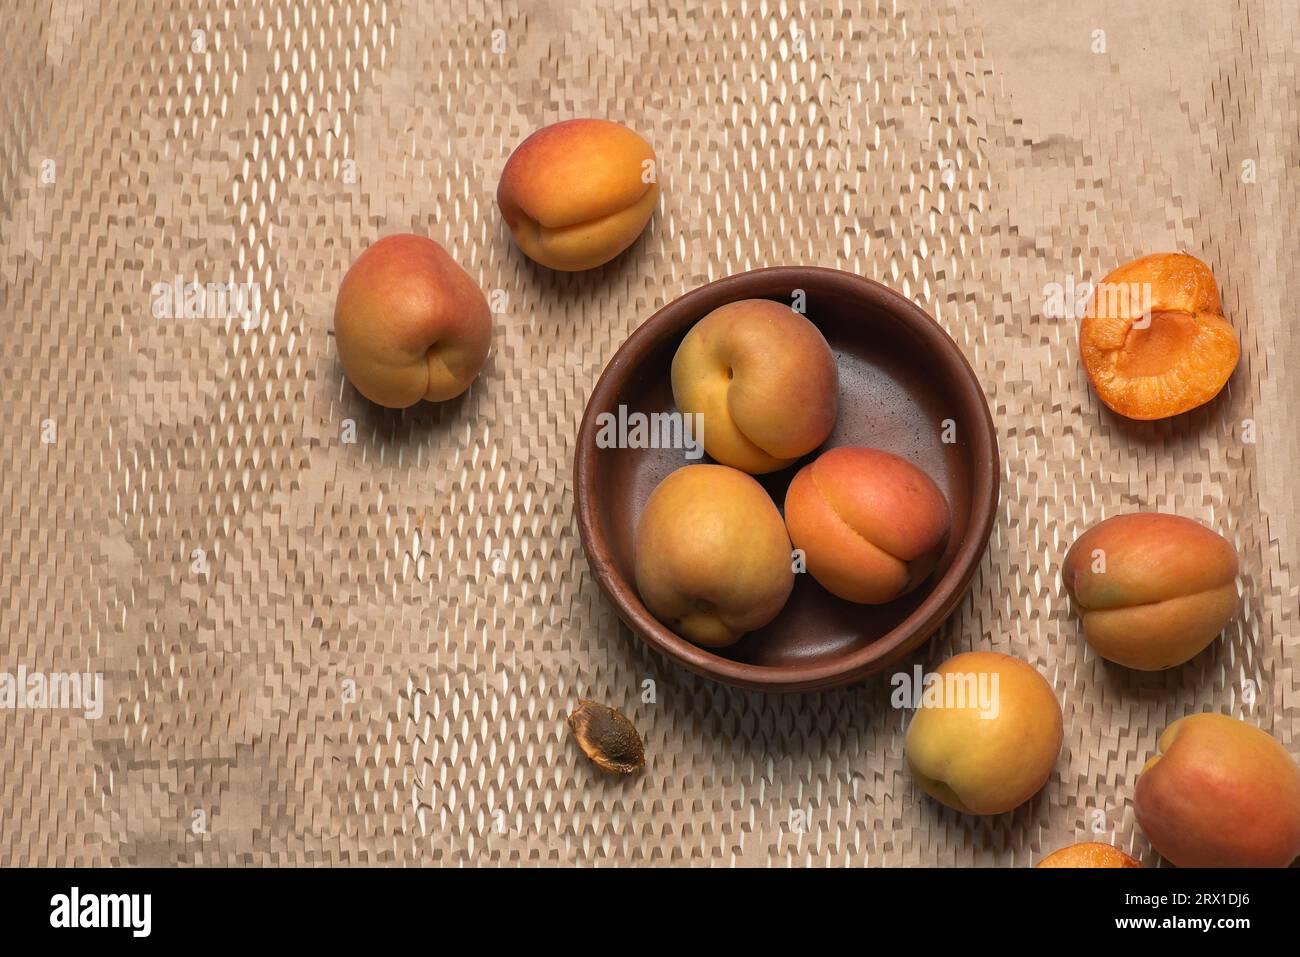 Fresh, ripe, juicy apricots in a brown bowl on a light background. Whole fruit, fruits around the bowl, apricot seeds Stock Photo